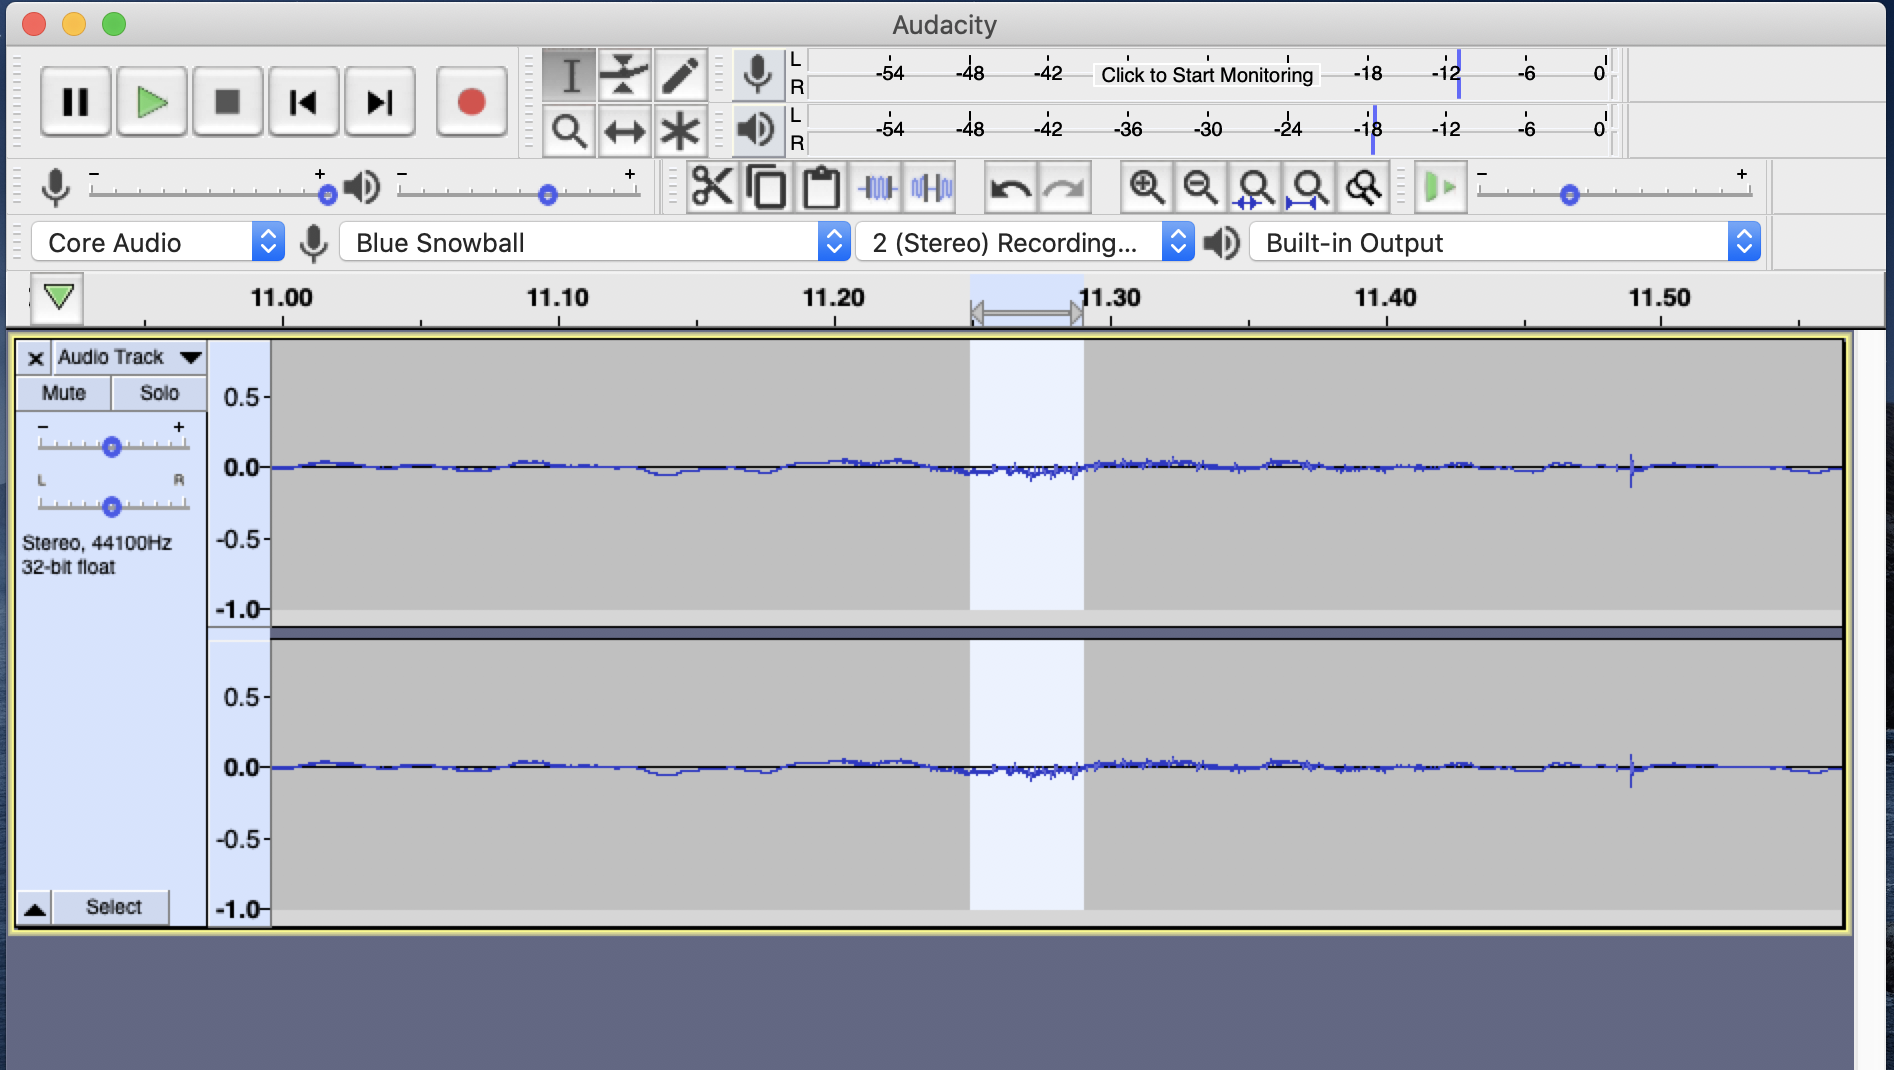 Audacity window with small selection highlighted